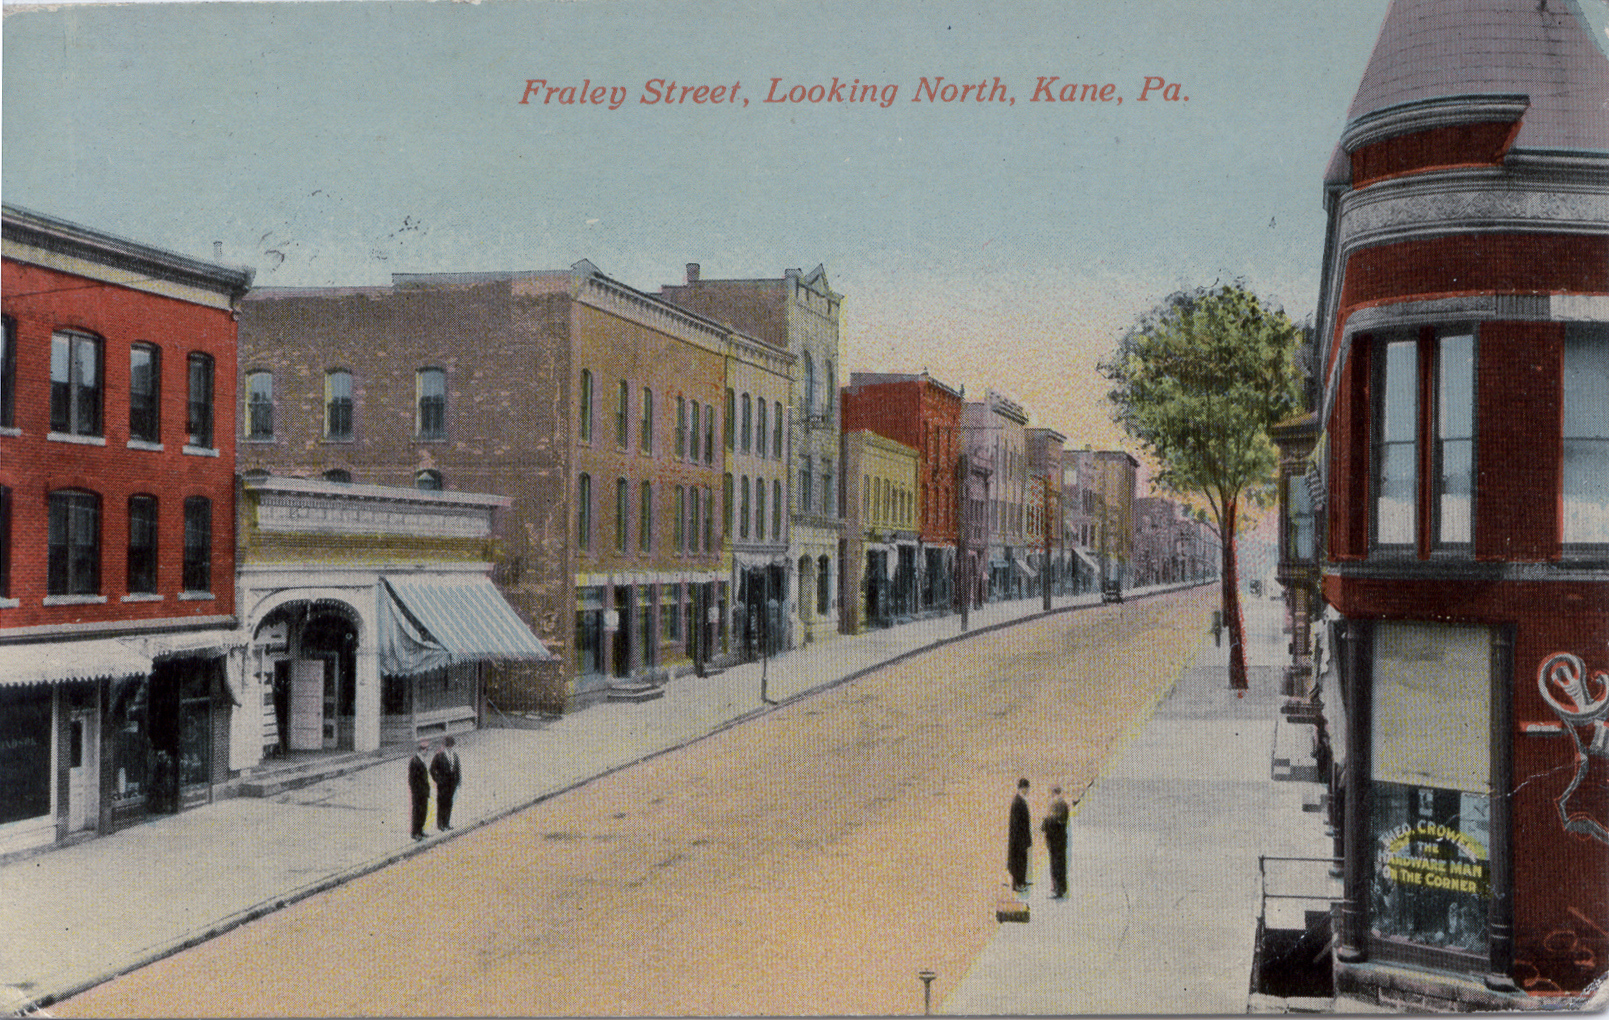 Fraley Street, Looking North, Kane PA